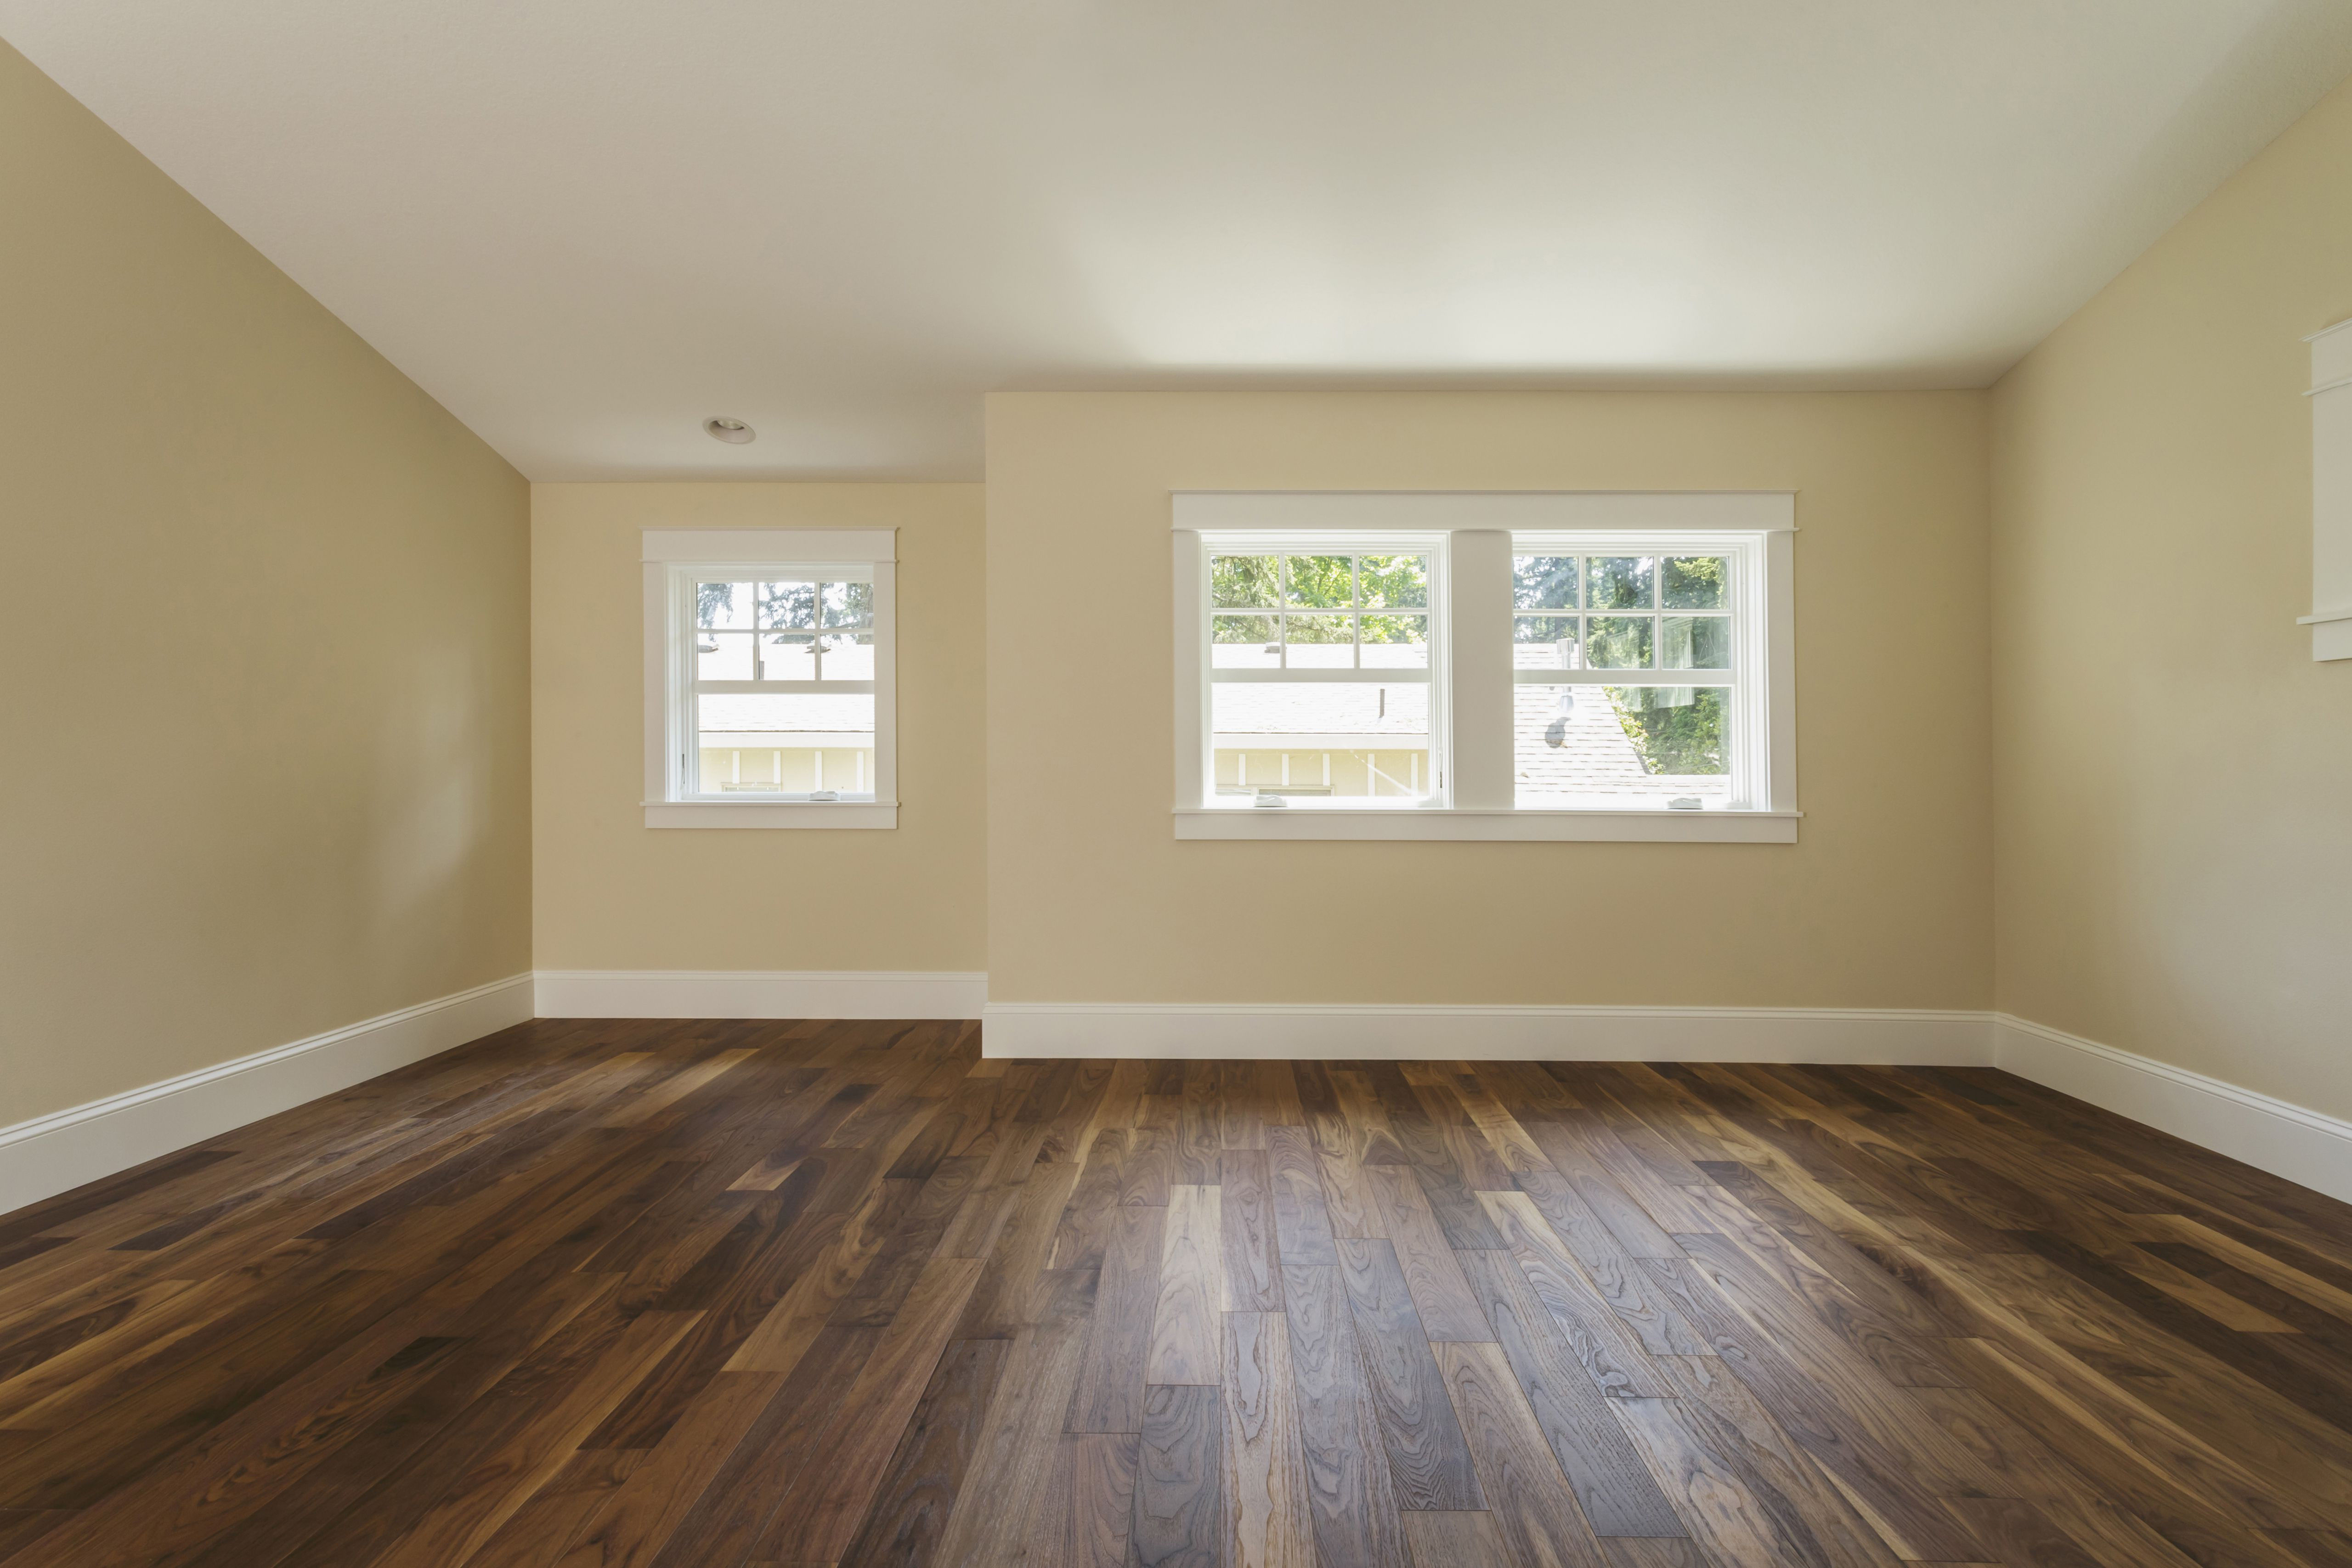 18 Lovable The Correct Direction For Laying Hardwood Floors